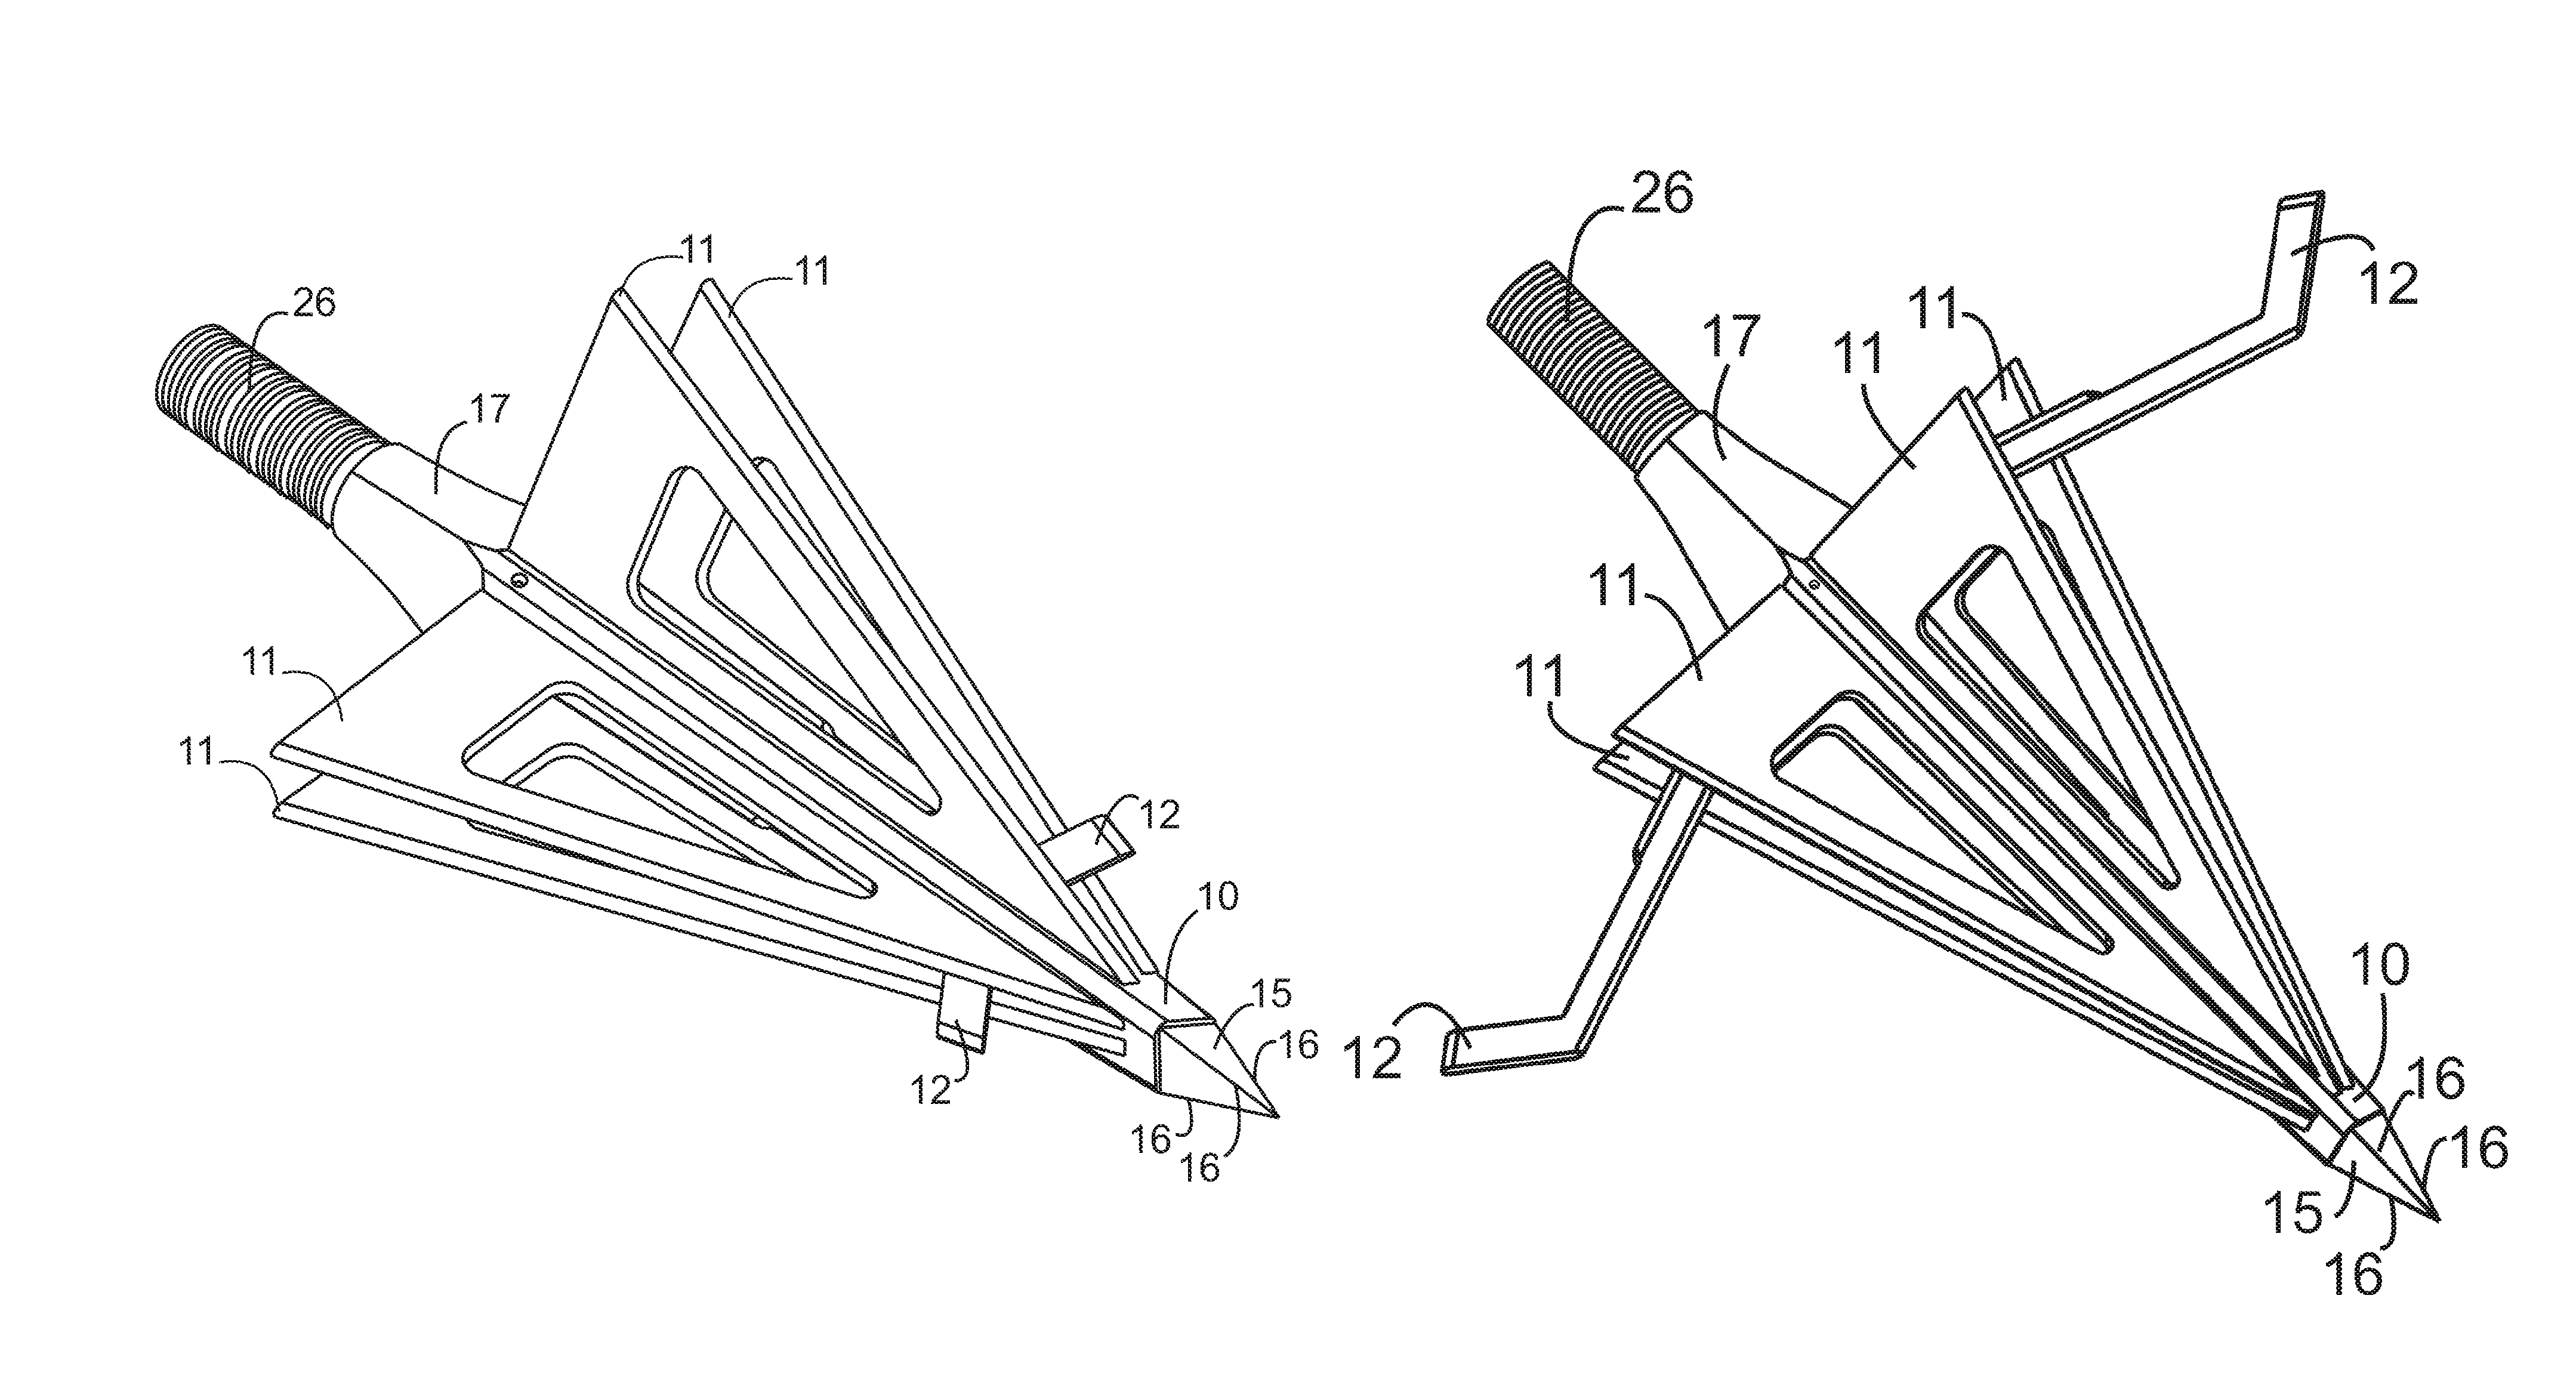 Hunting arrowhead having fixed and expandable blades